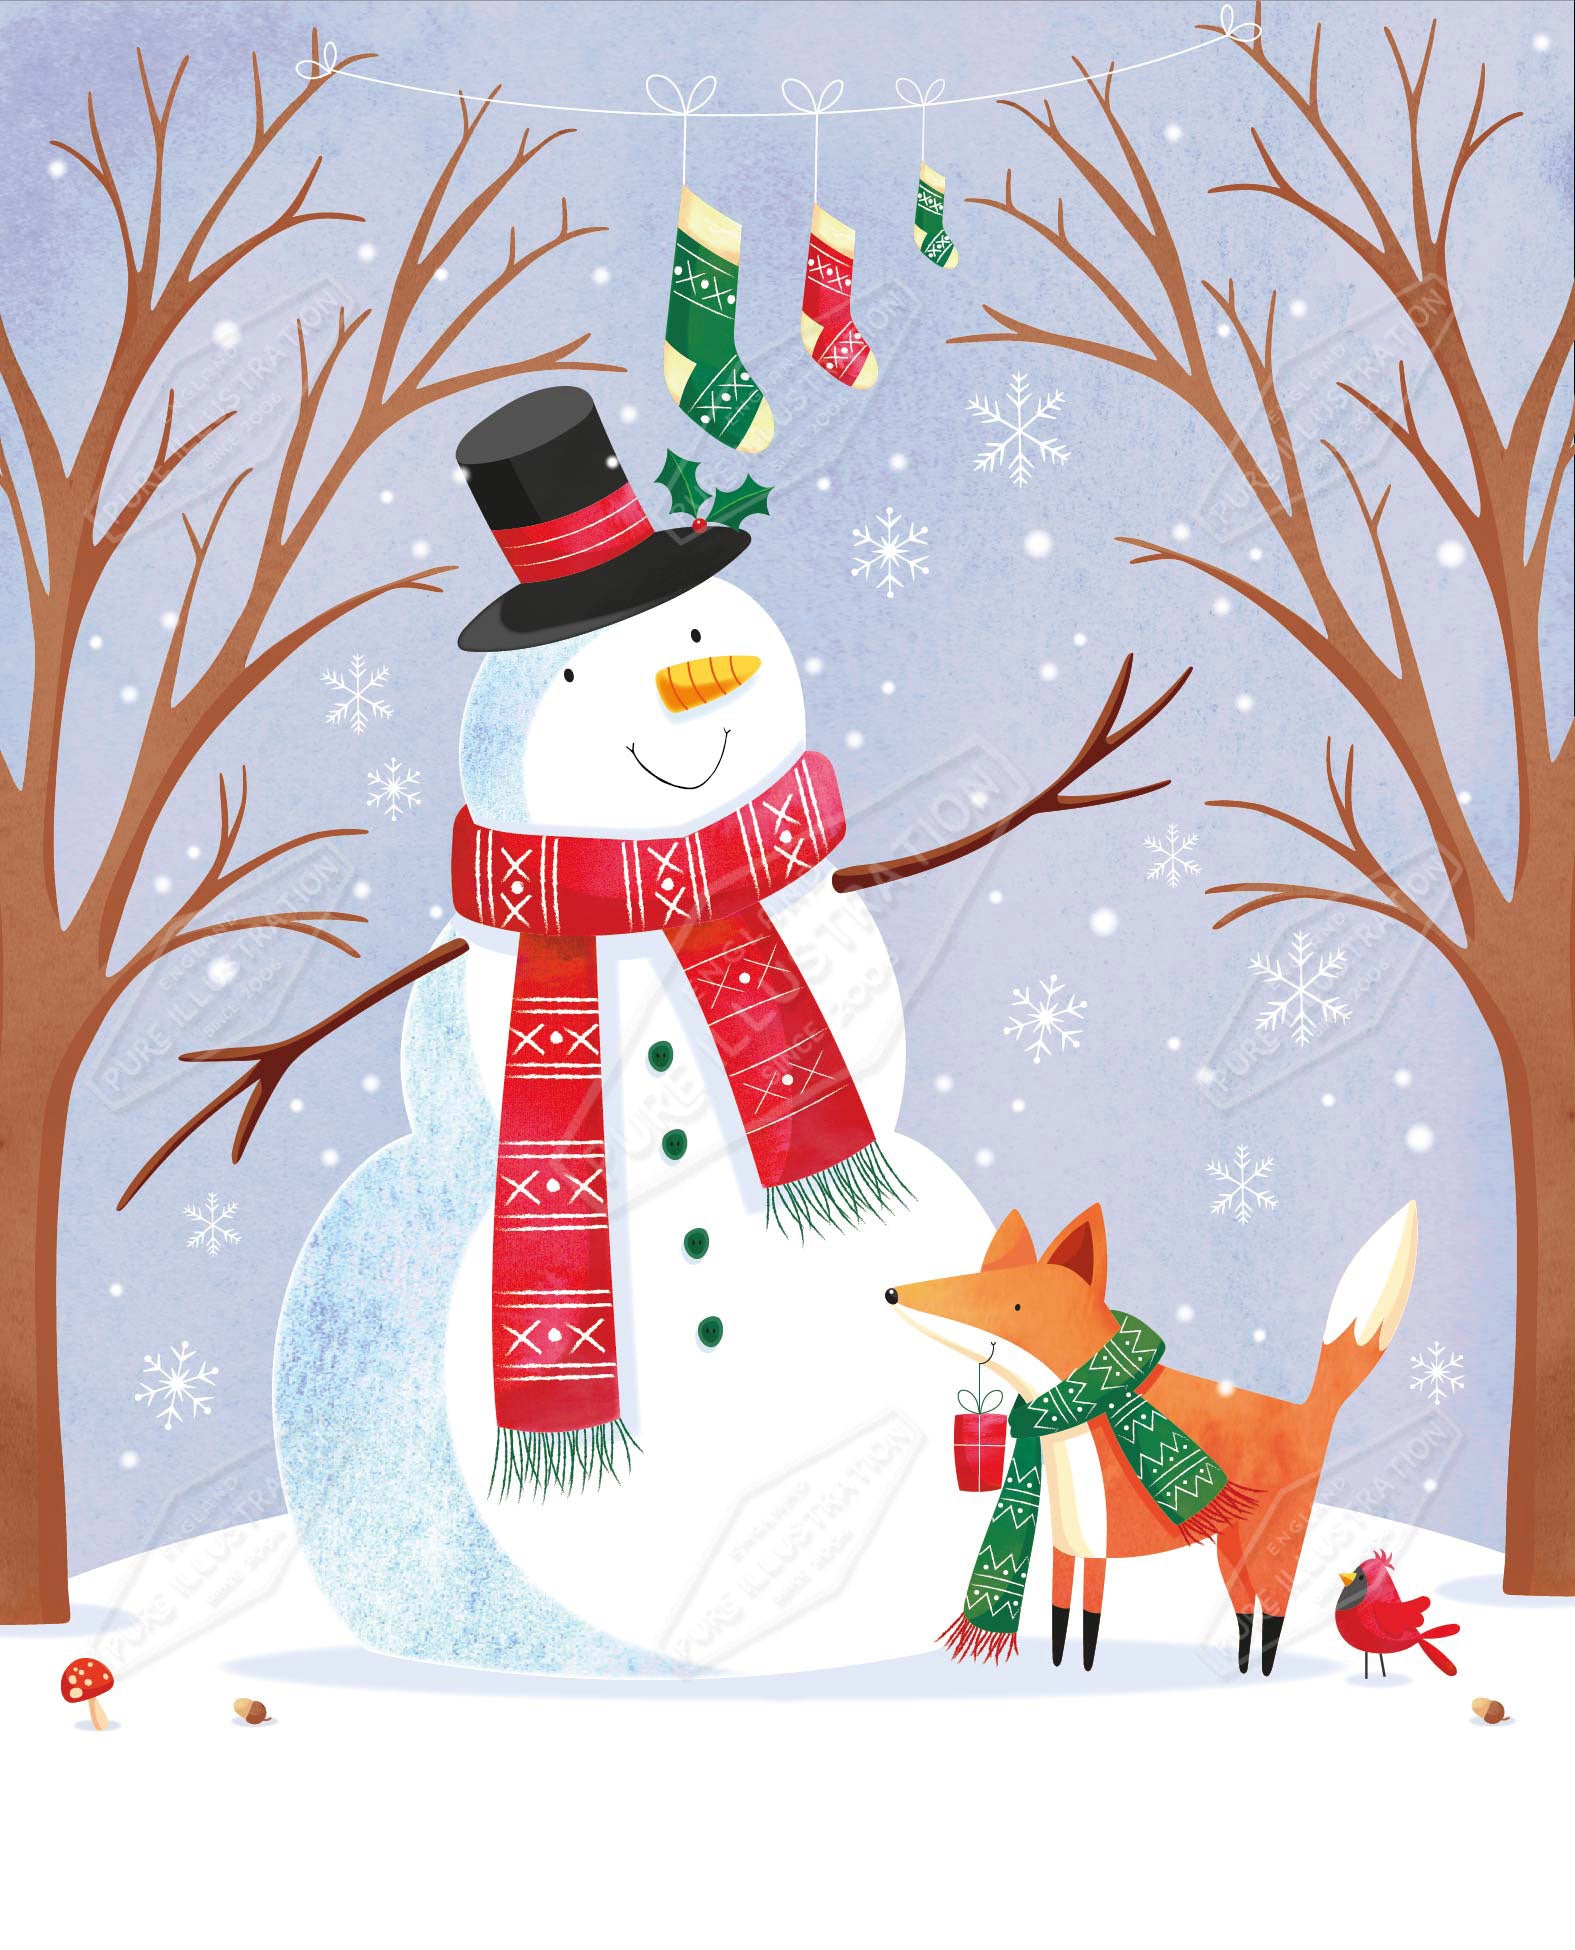 00035107SPI- Sarah Pitt is represented by Pure Art Licensing Agency - Christmas Greeting Card Design